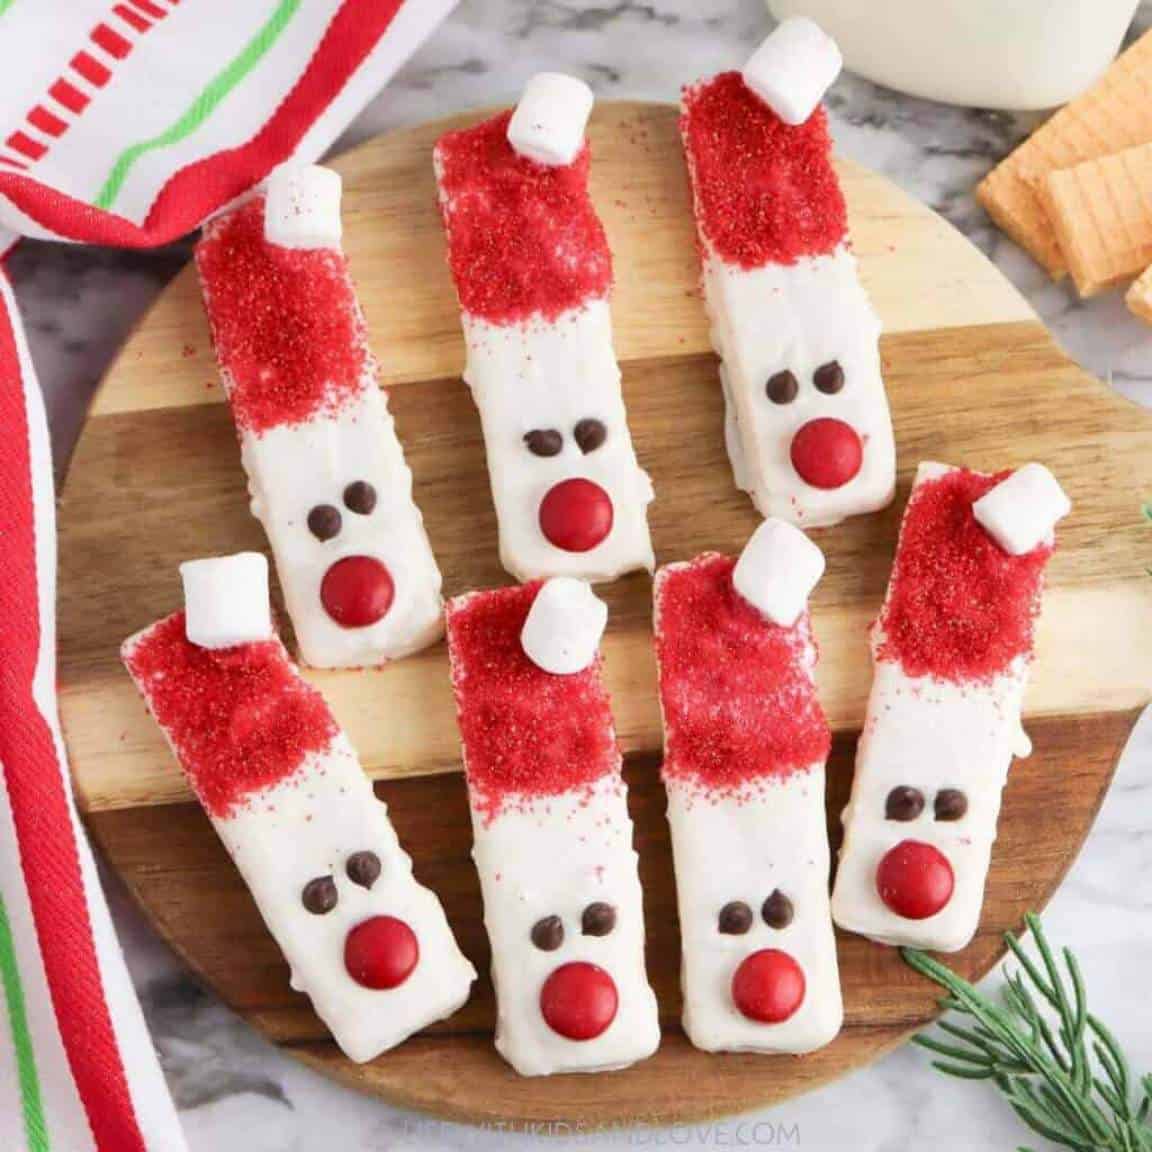 Rectangular wafer cookies decorated with red and white candy to look like Santa.